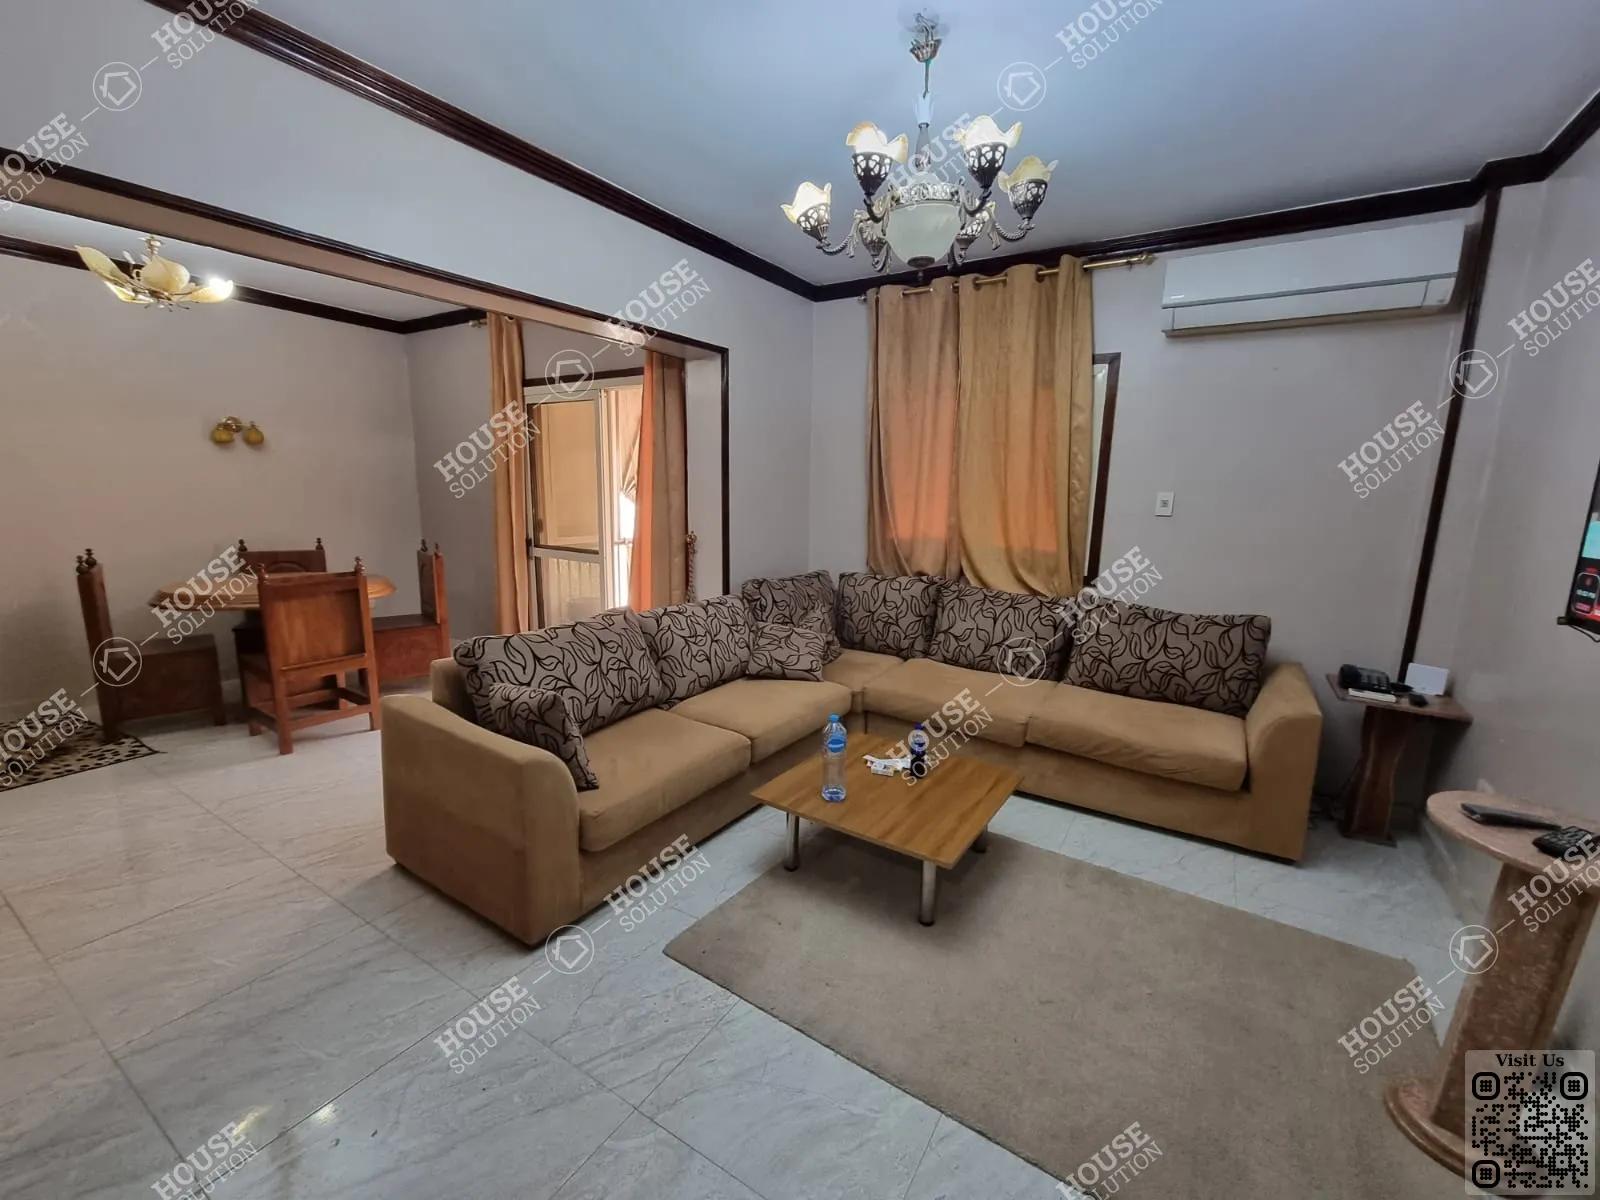 RECEPTION  @ Apartments For Rent In Maadi Maadi Degla Area: 110 m² consists of 2 Bedrooms 2 Bathrooms Furnished 5 stars #5229-0